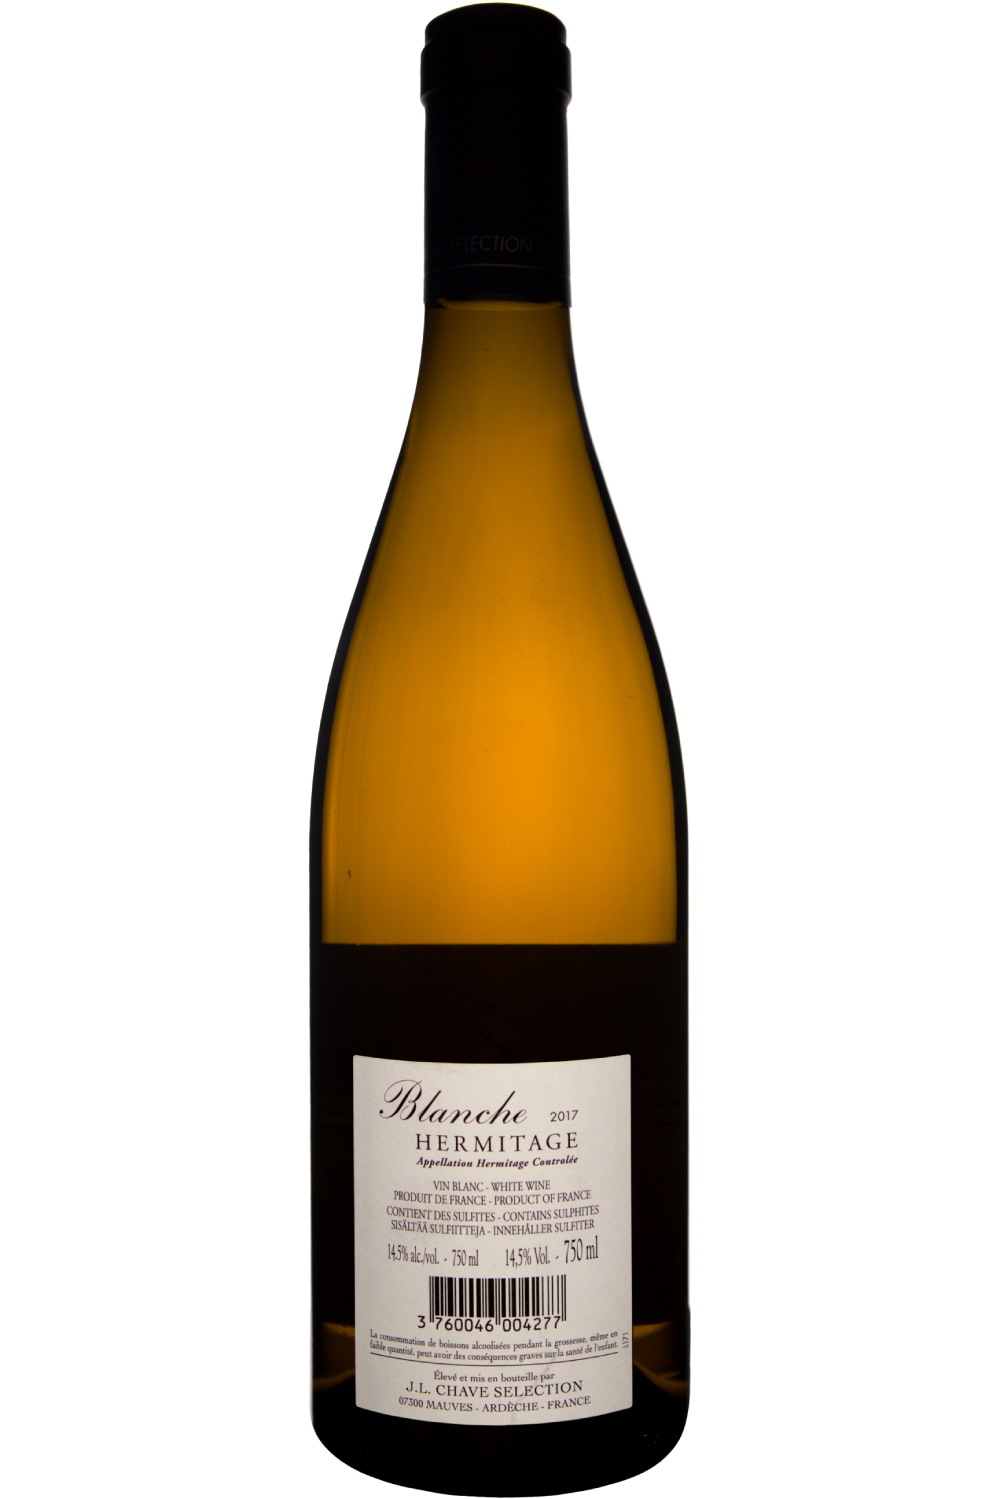 WineVins Jean-Louis Chave Selection Blanche Hermitage 2017